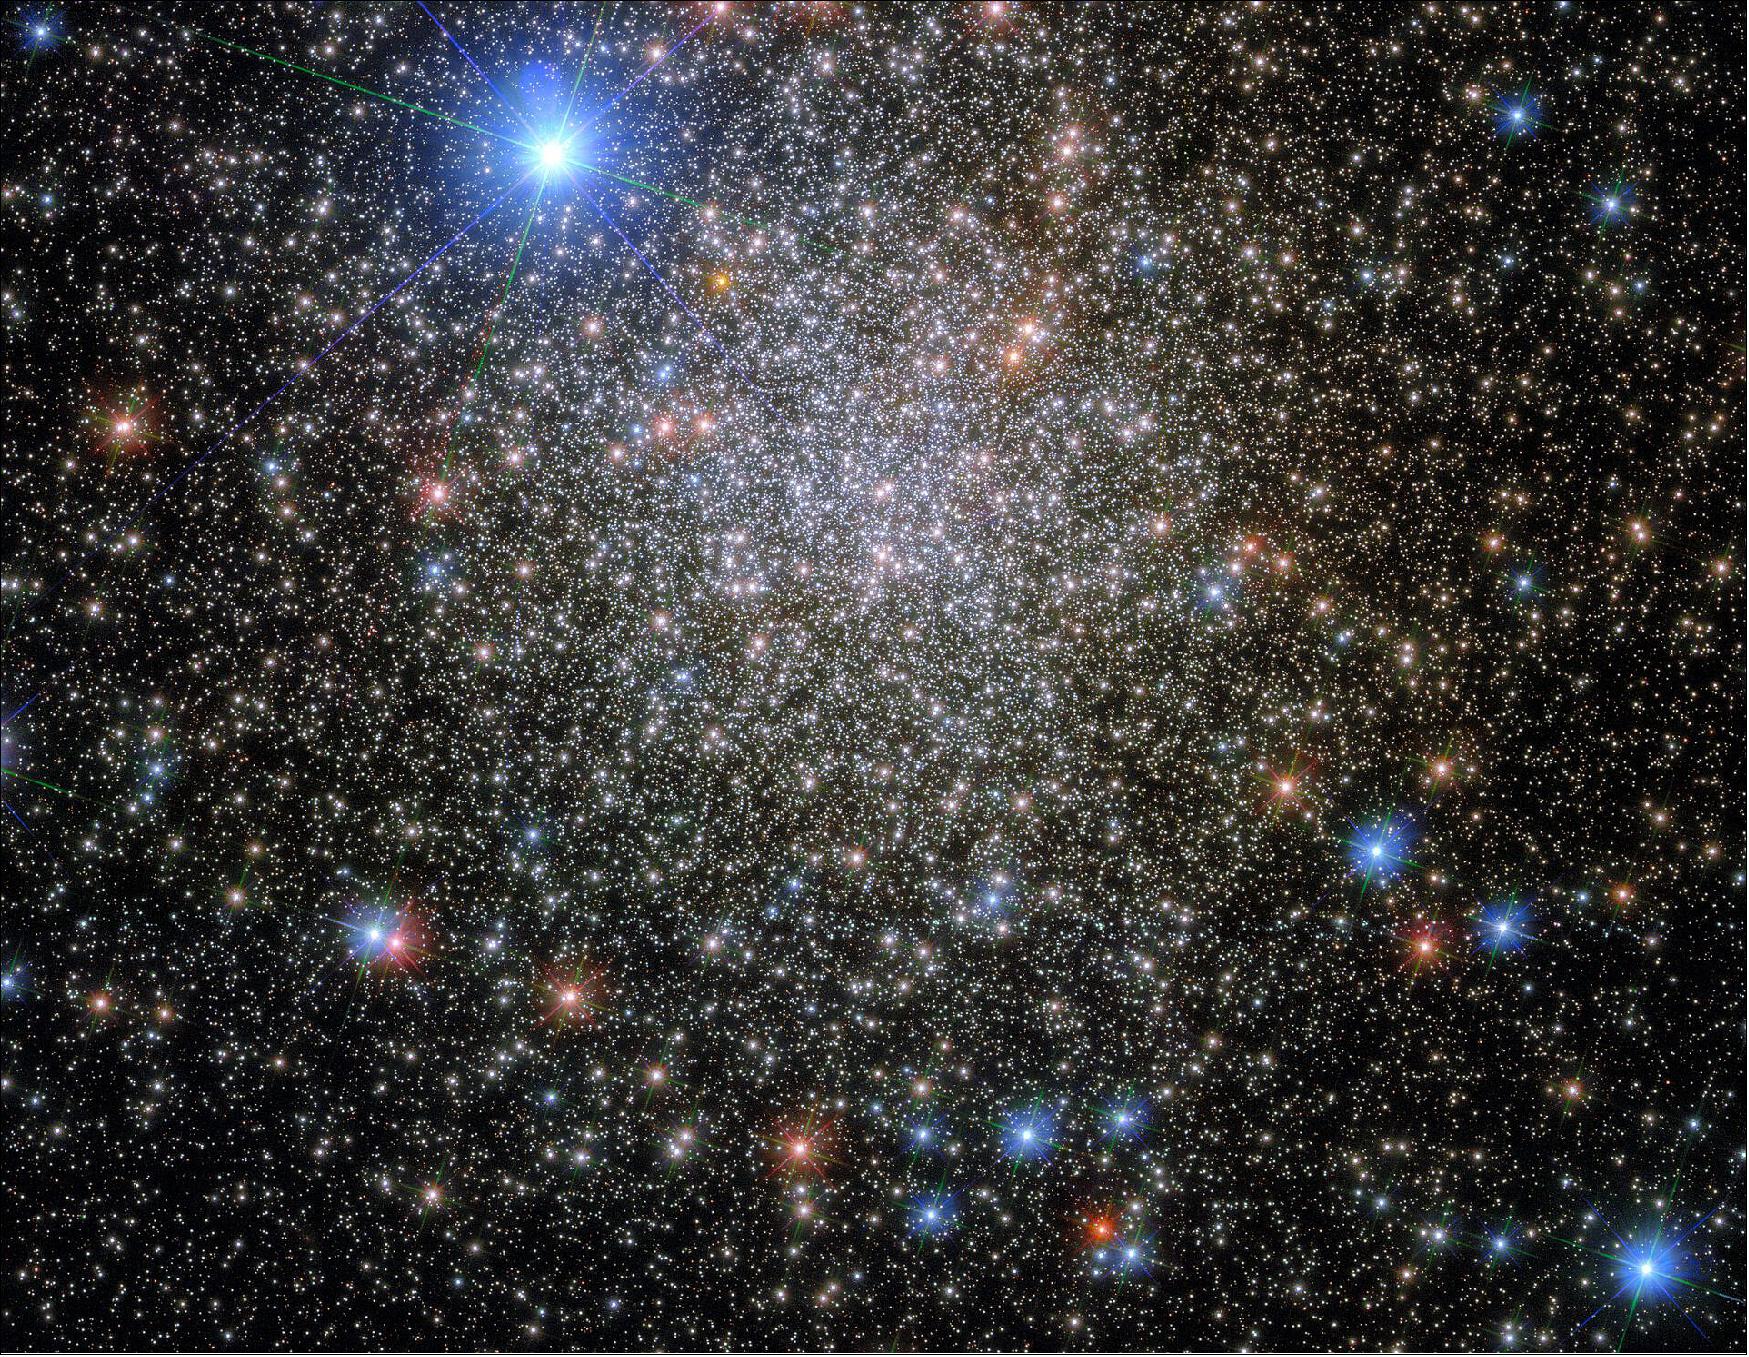 Figure 70: This image of NGC6380 was taken with Hubble’s Wide Field Camera 3 (WFC3), which, as its name suggests, has a wide field of view, meaning that it can image relatively large areas of the sky in enormous detail (image credit: ESA/Hubble & NASA, E. Noyola; CC BY 4.0)